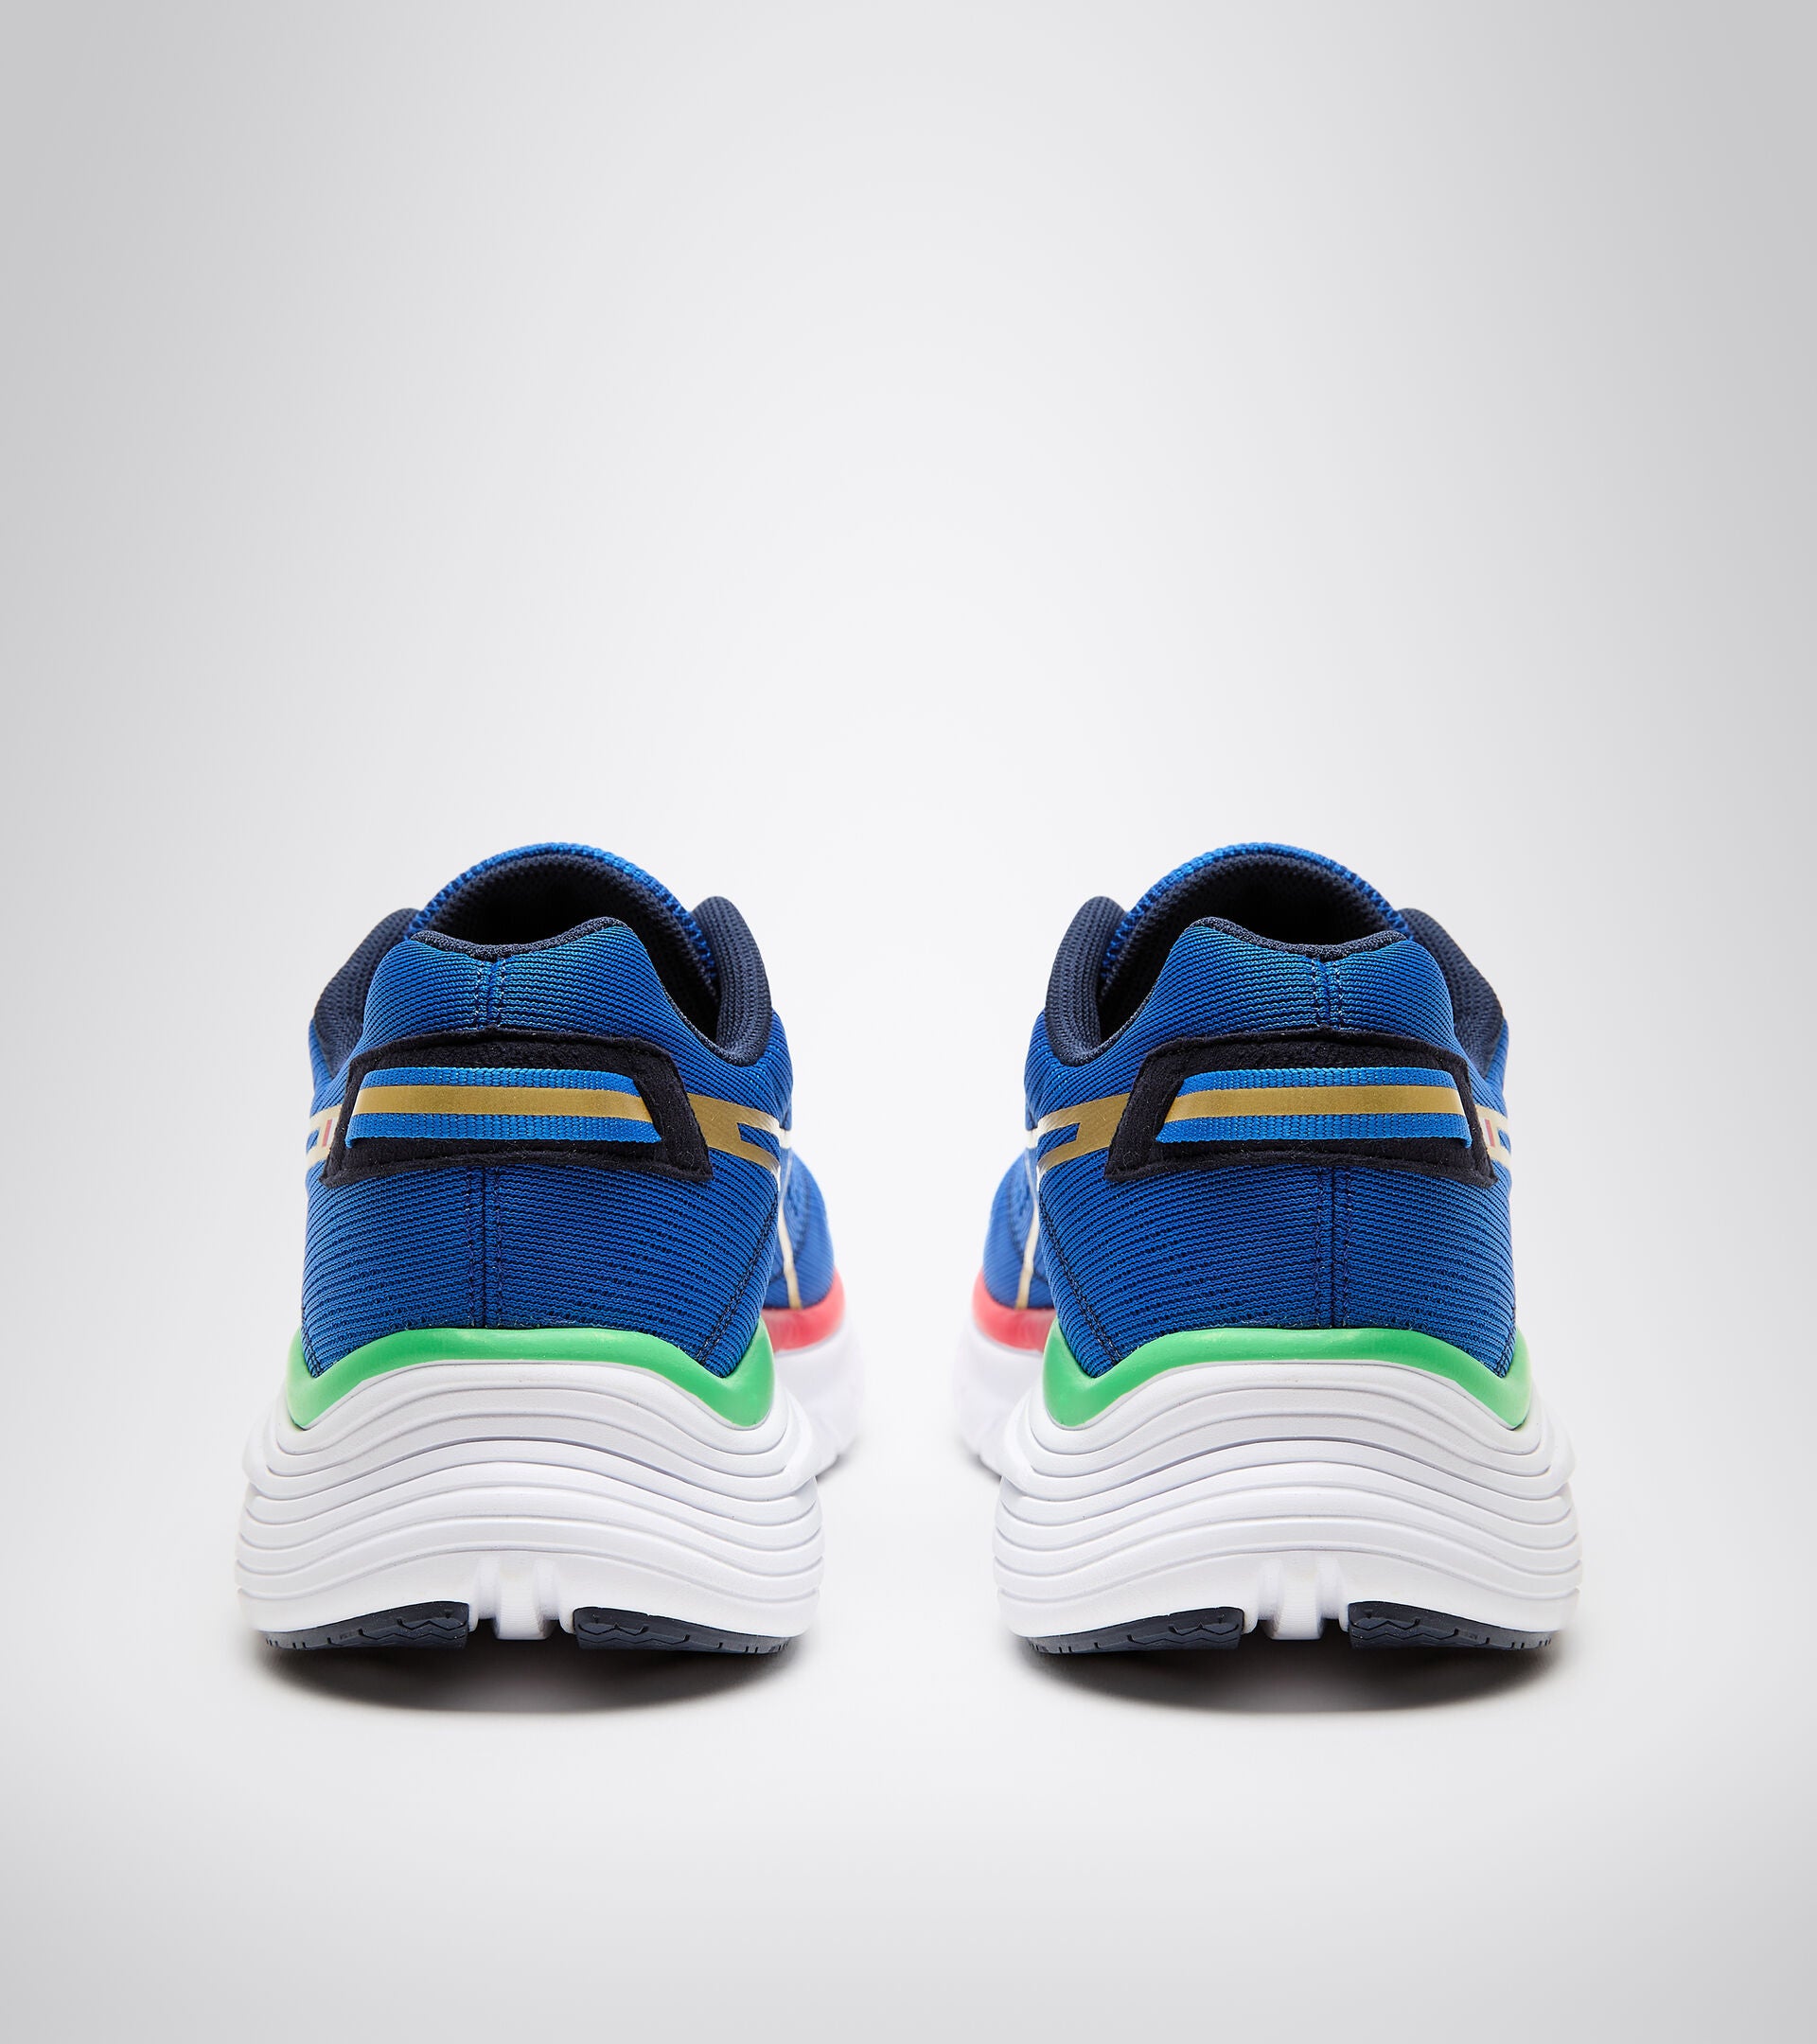 The diadora Atomo is a gret fitting, soft feeling running shoe from diadora.  It has a lot of foam in the midsole making it inheritably stable even though its a neutral sunning shoe